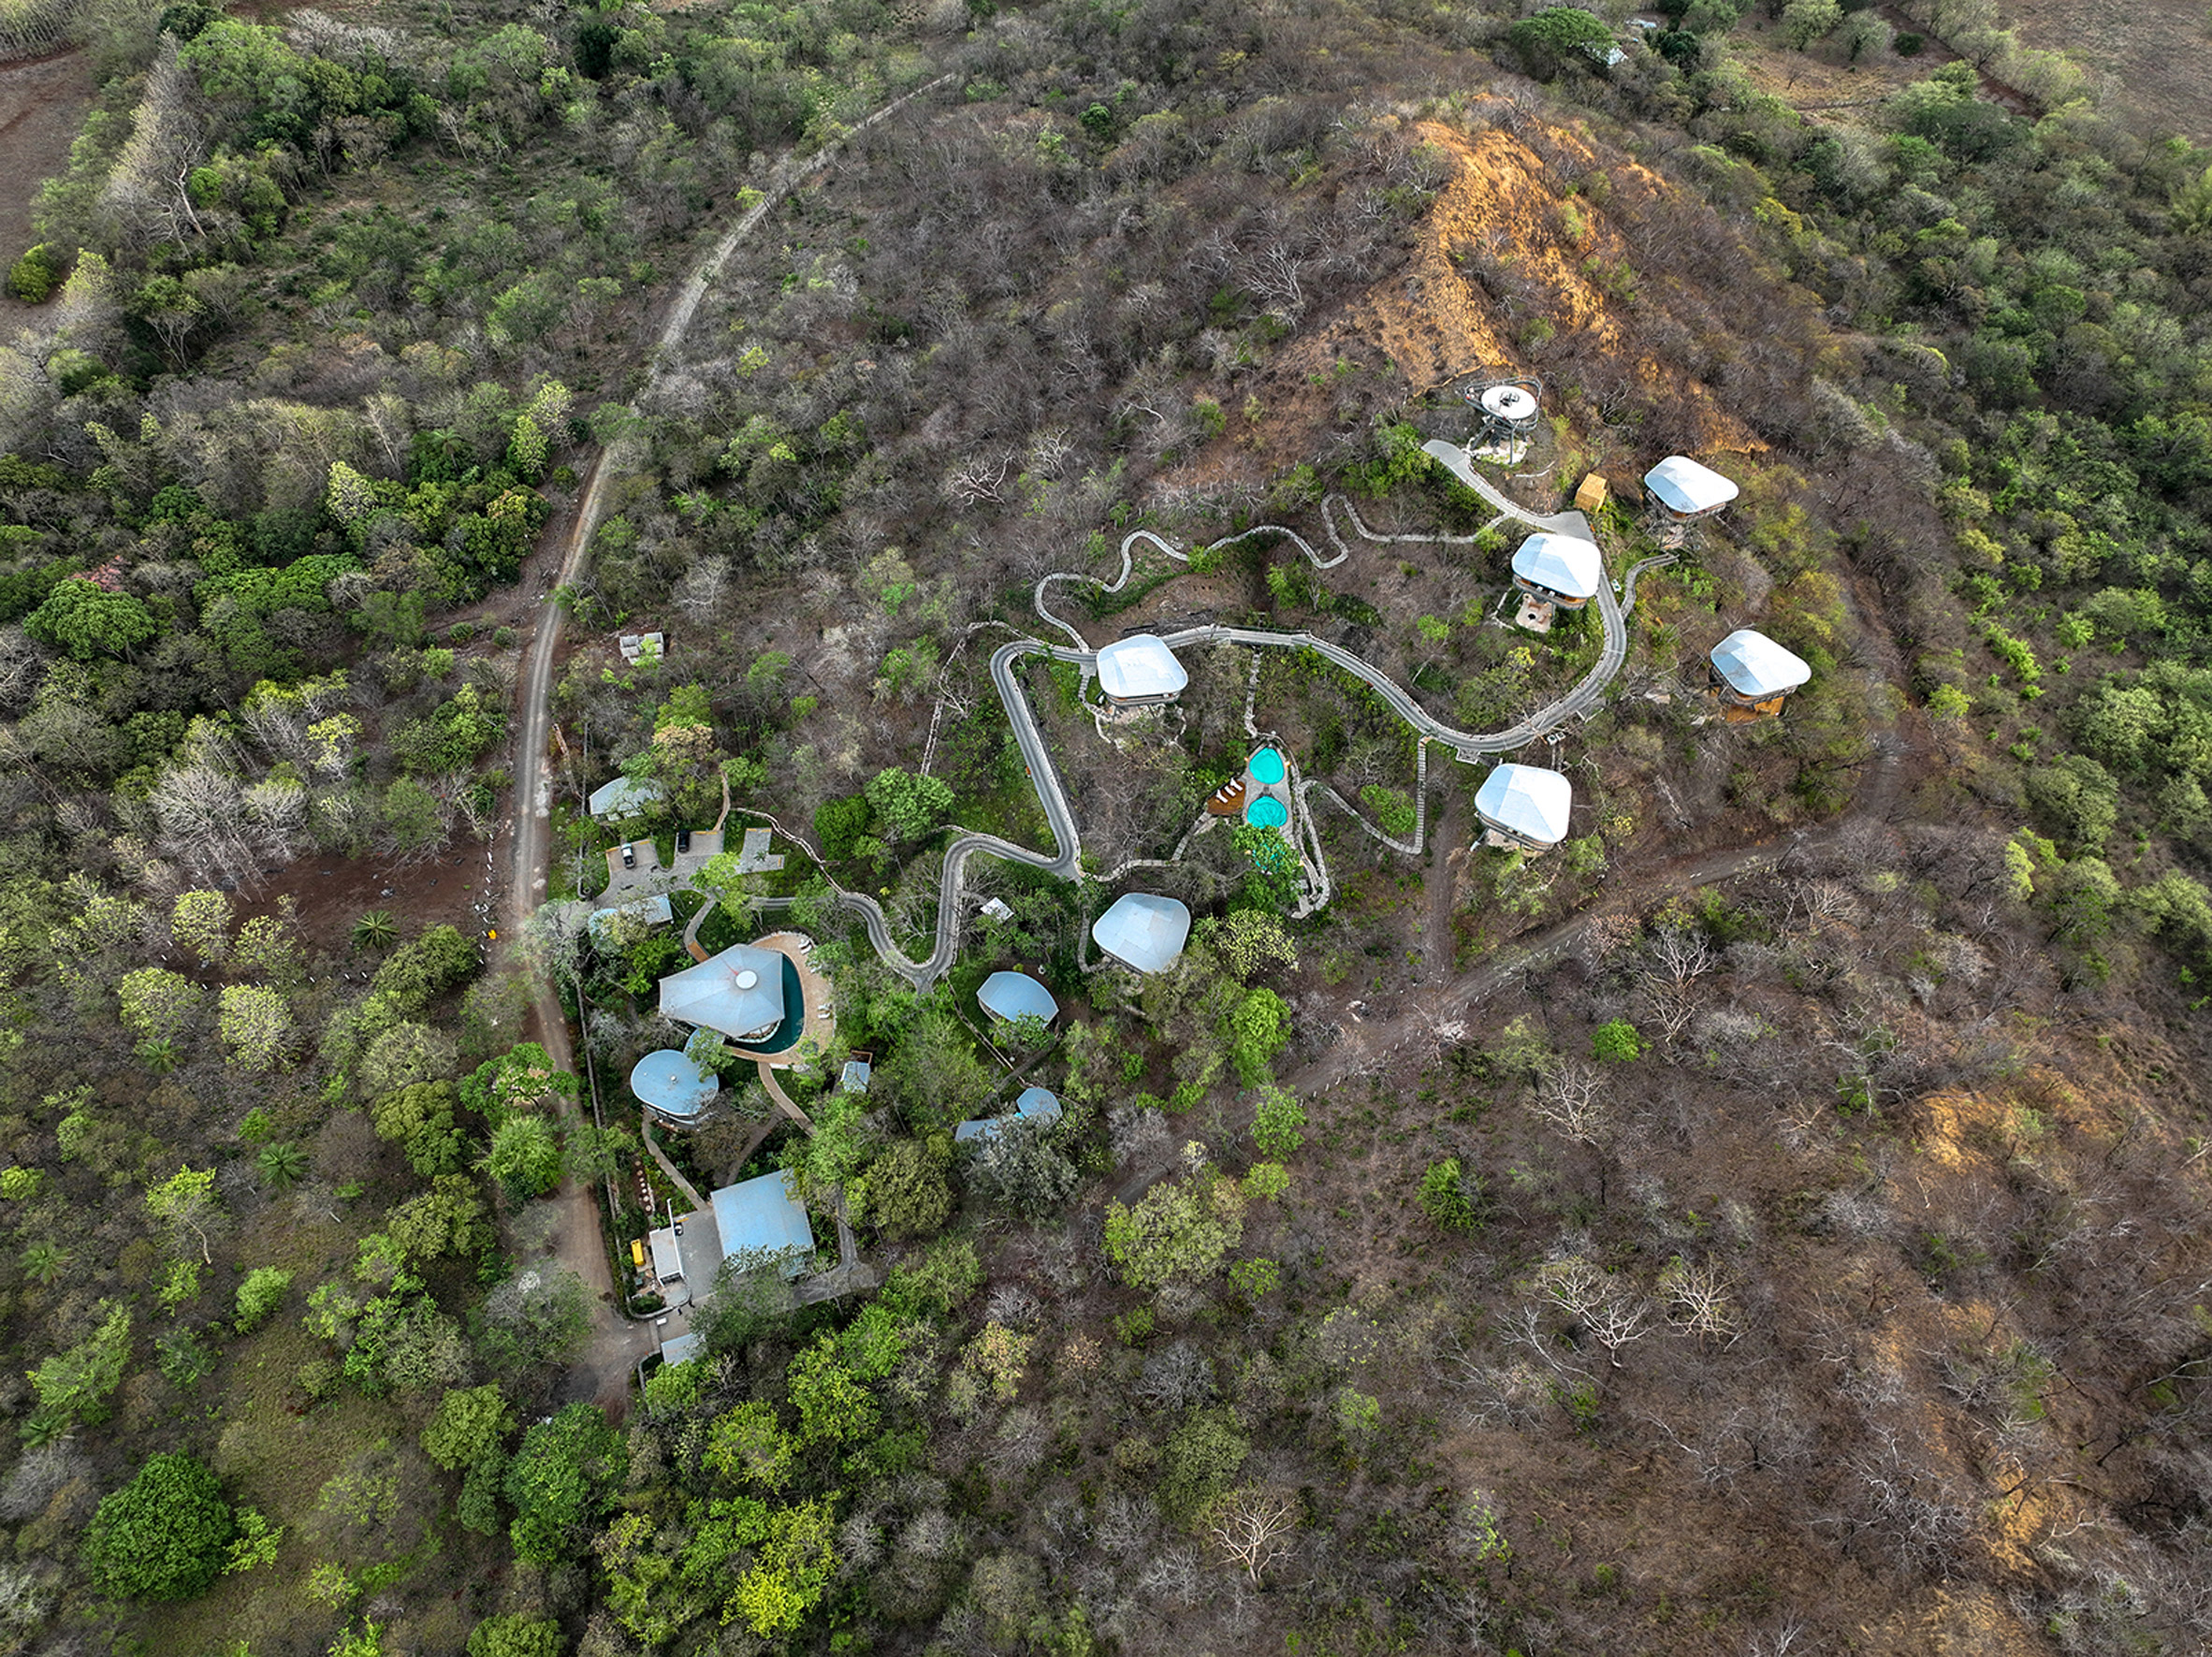 Treehouse-style pods built into the Costa Rican landscape